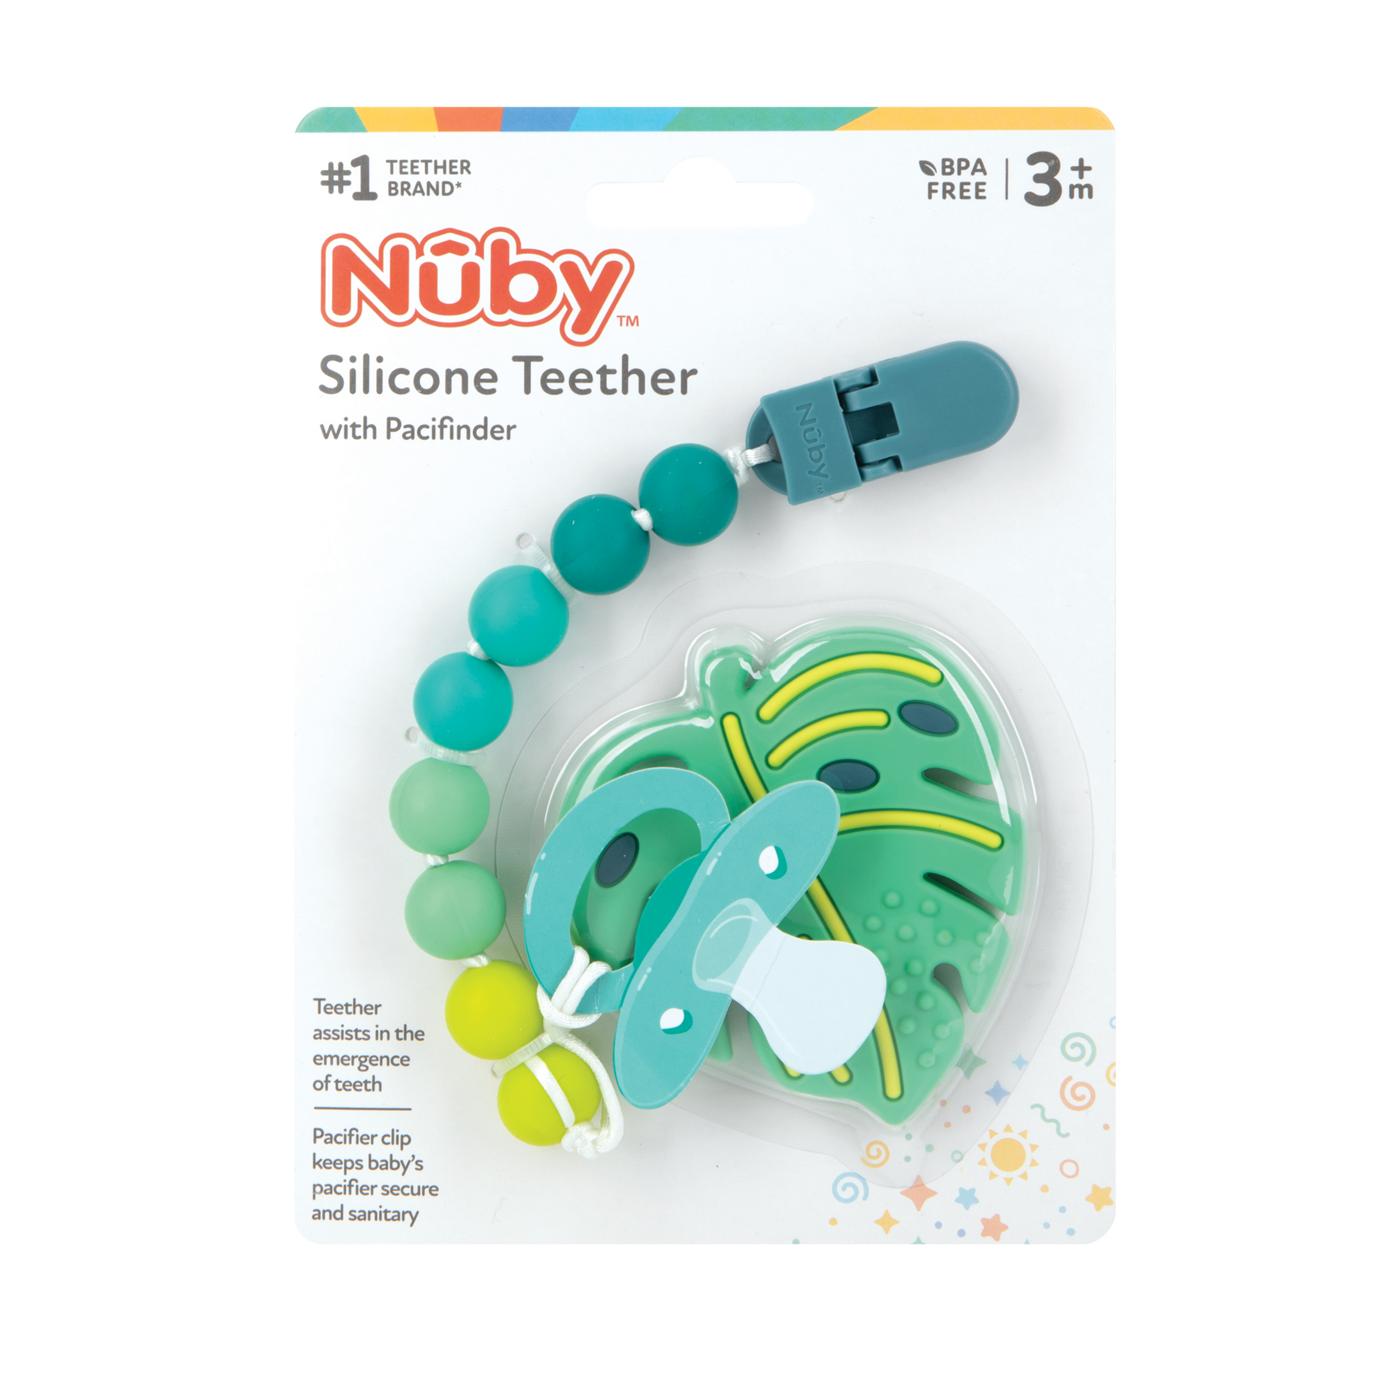 Nuby Silicone Teether with Pacifinder; image 1 of 2